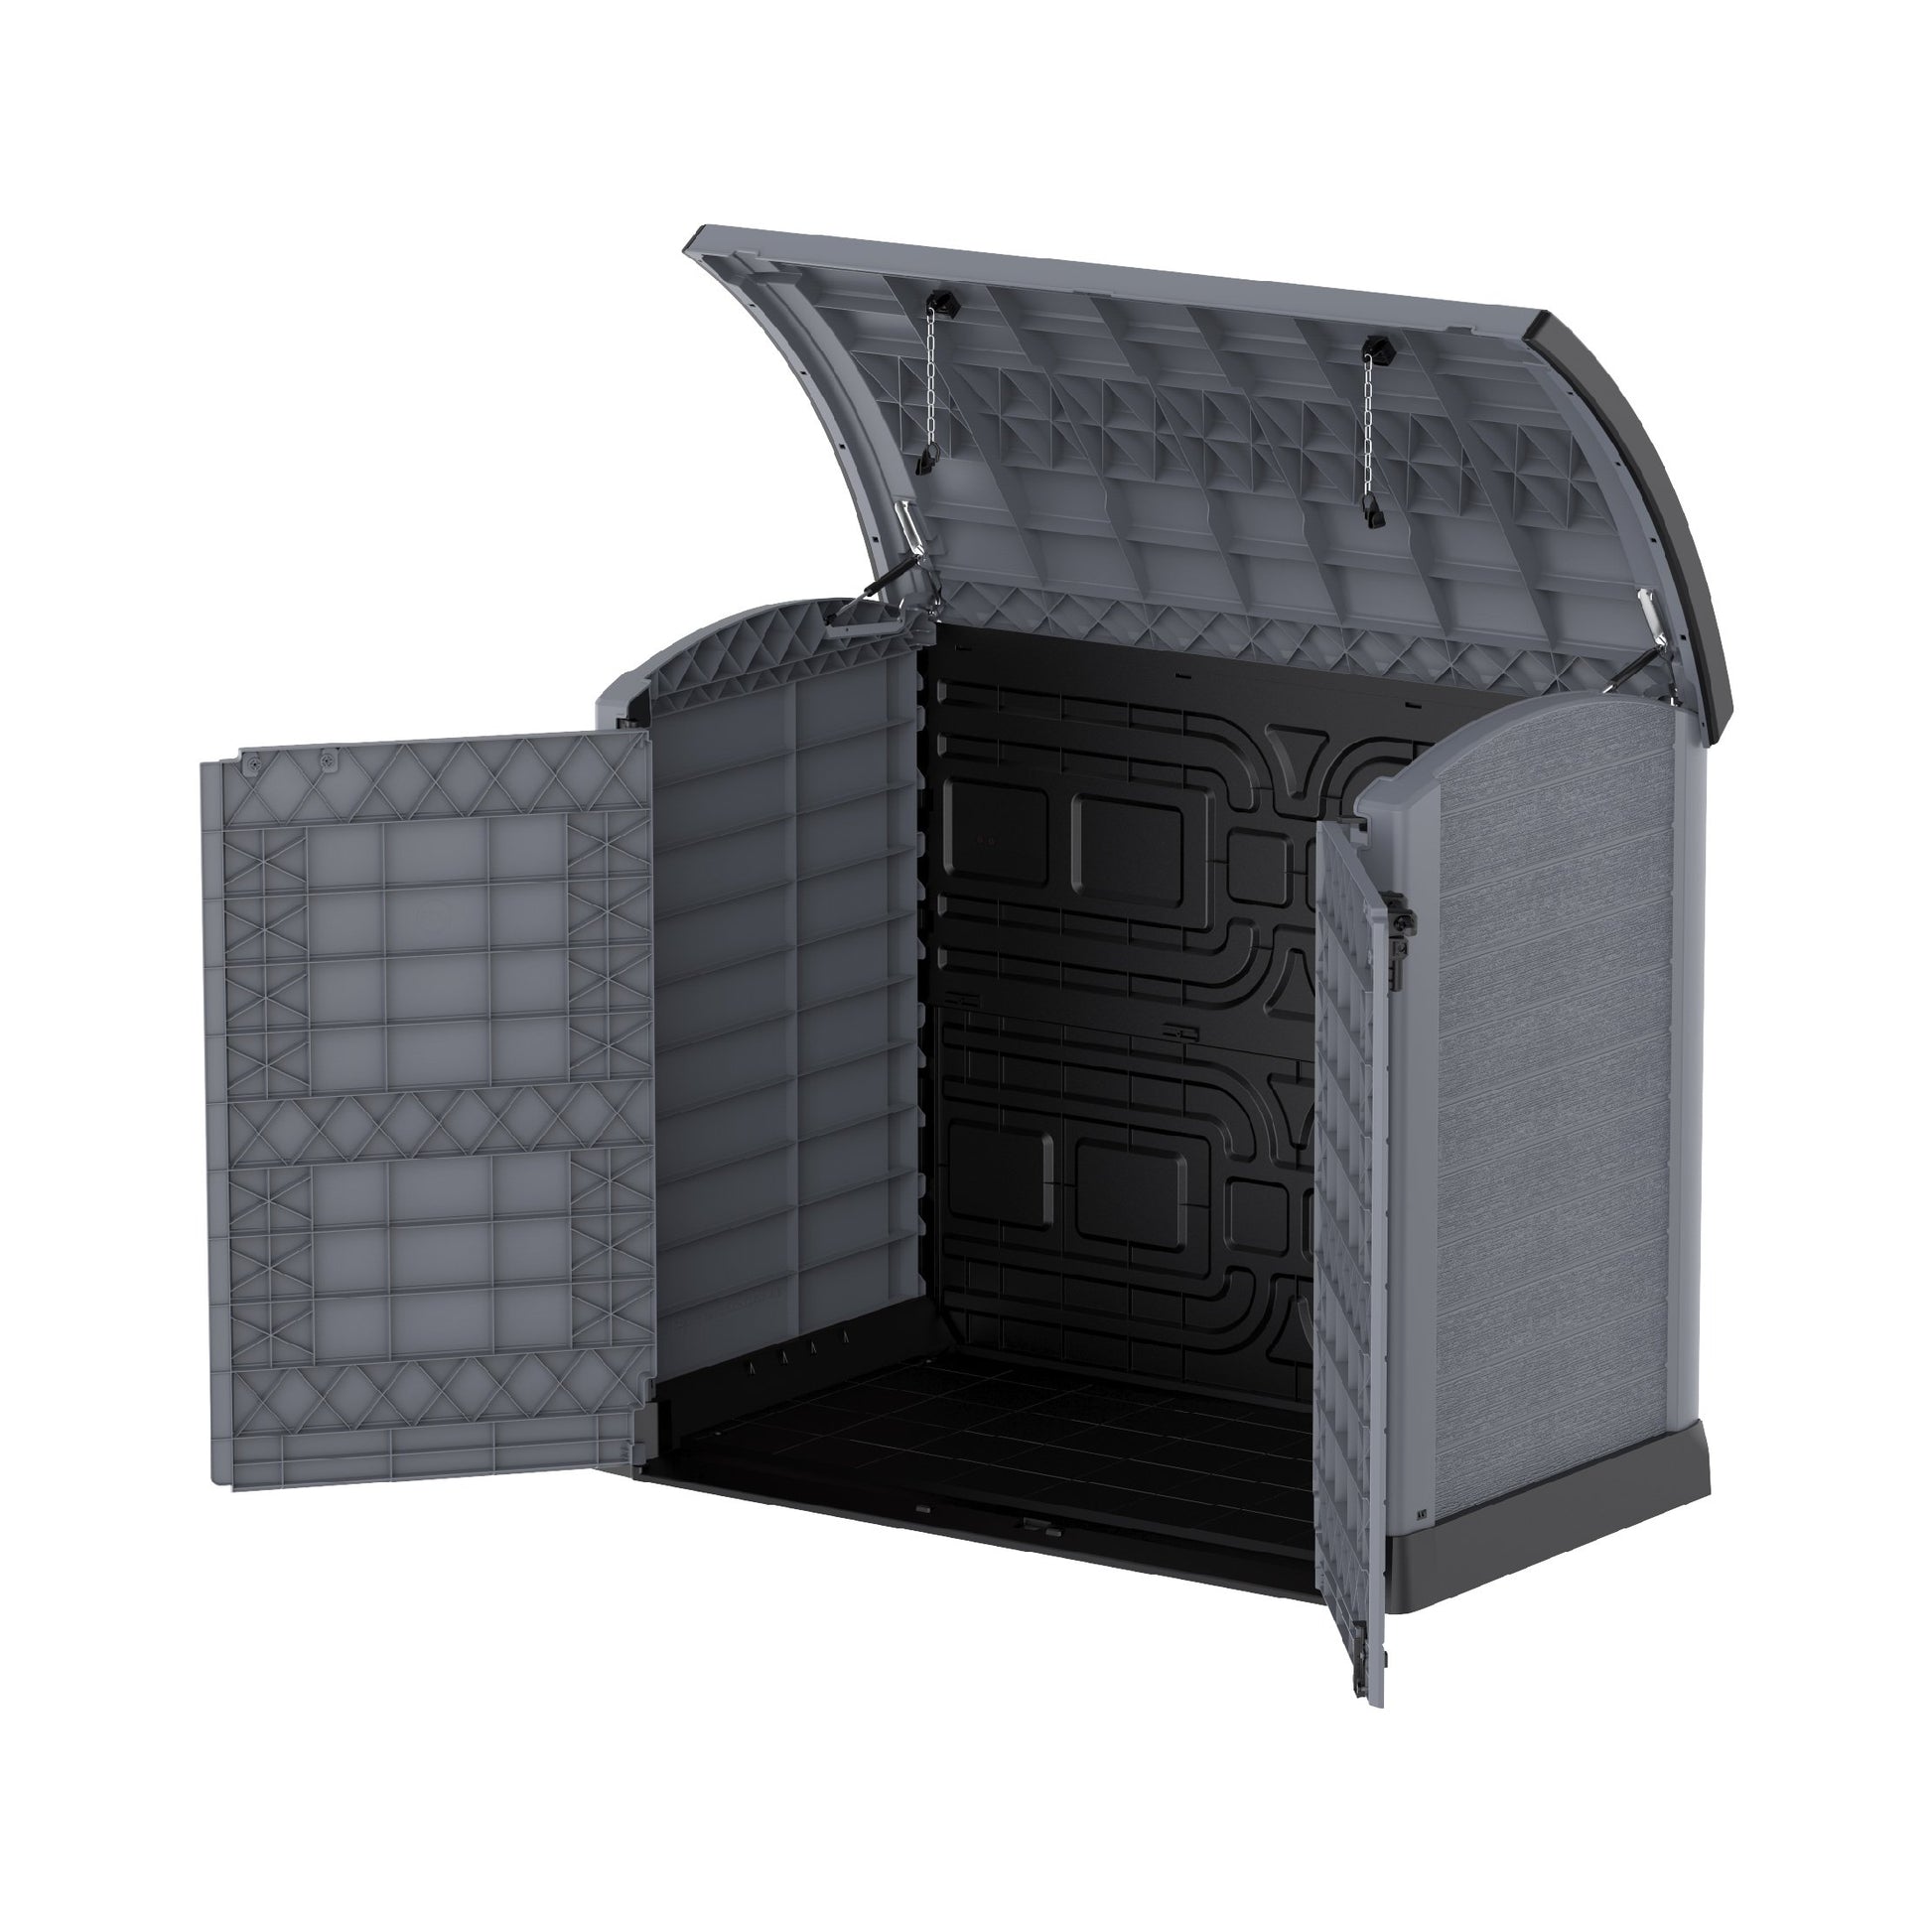 1200L Small Outdoor Storage Shed